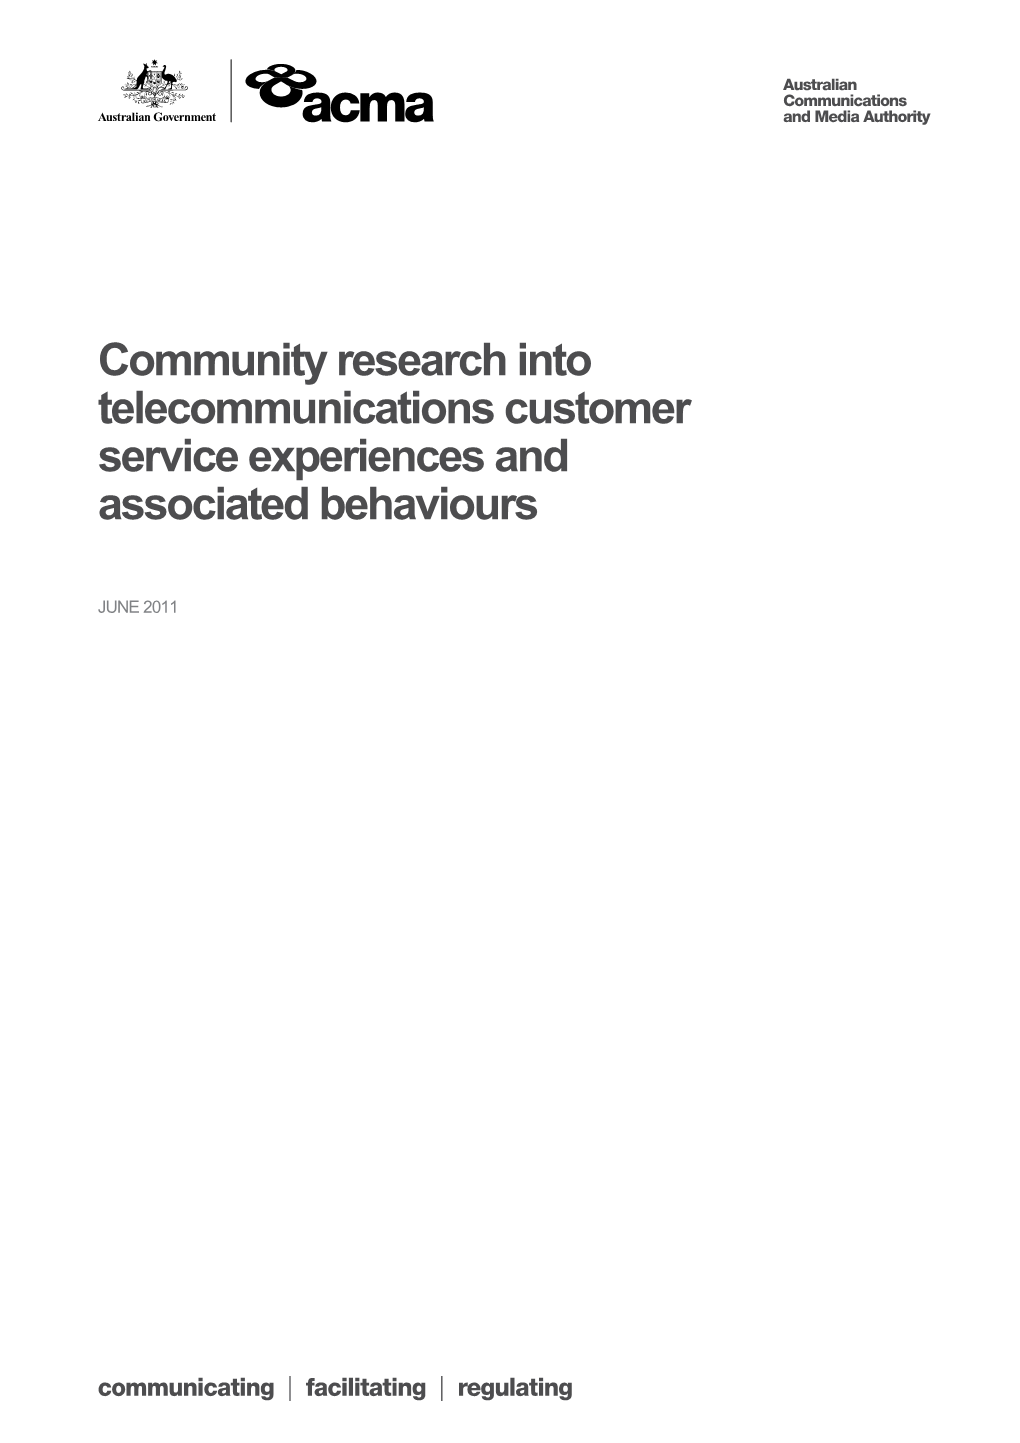 Community Research Into Telecommunications Customer Service Experiences And Associated Behaviours